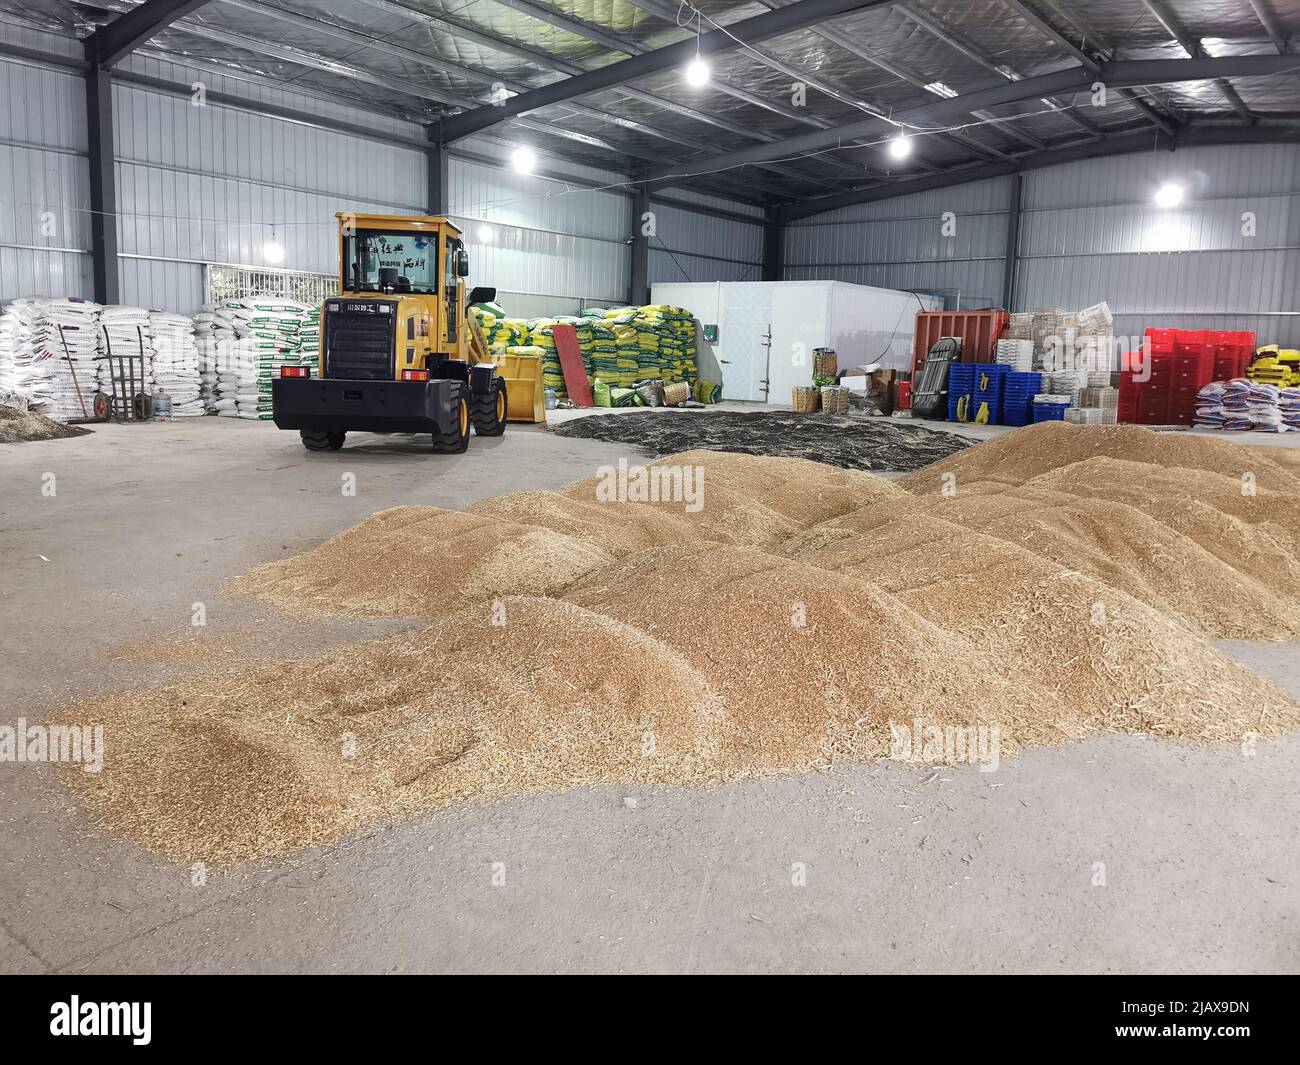 Tianmen. 19th May, 2022. Photo taken on May 19, 2022 shows harvested wheat and rapeseed at a storehouse of a cooperative in Tianmen City, central China's Hubei Province. TO GO WITH 'Across China: Farmer's museum in central China chronicles bygone era' Credit: Yue Wenwan/Xinhua/Alamy Live News Stock Photo